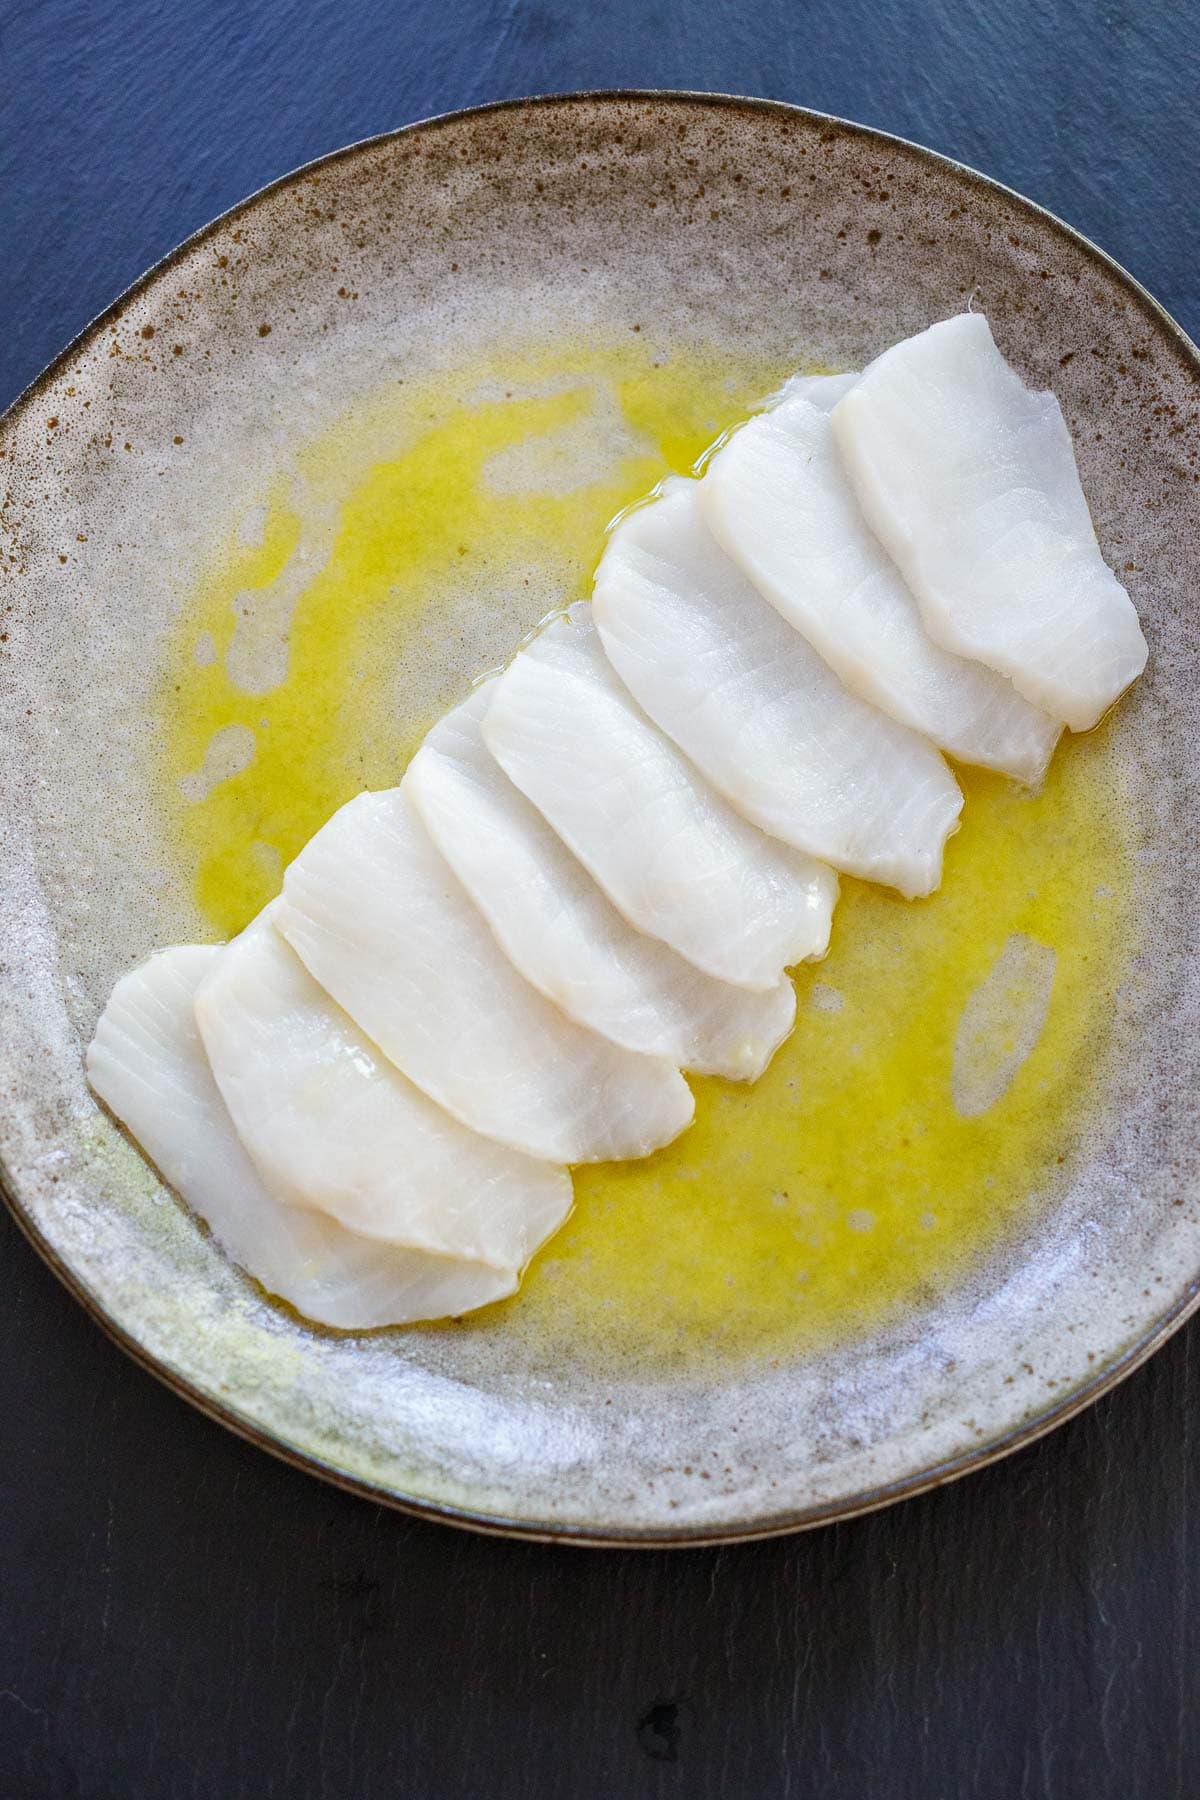 thin slices of raw fish arranged in a row on plate with olive oil